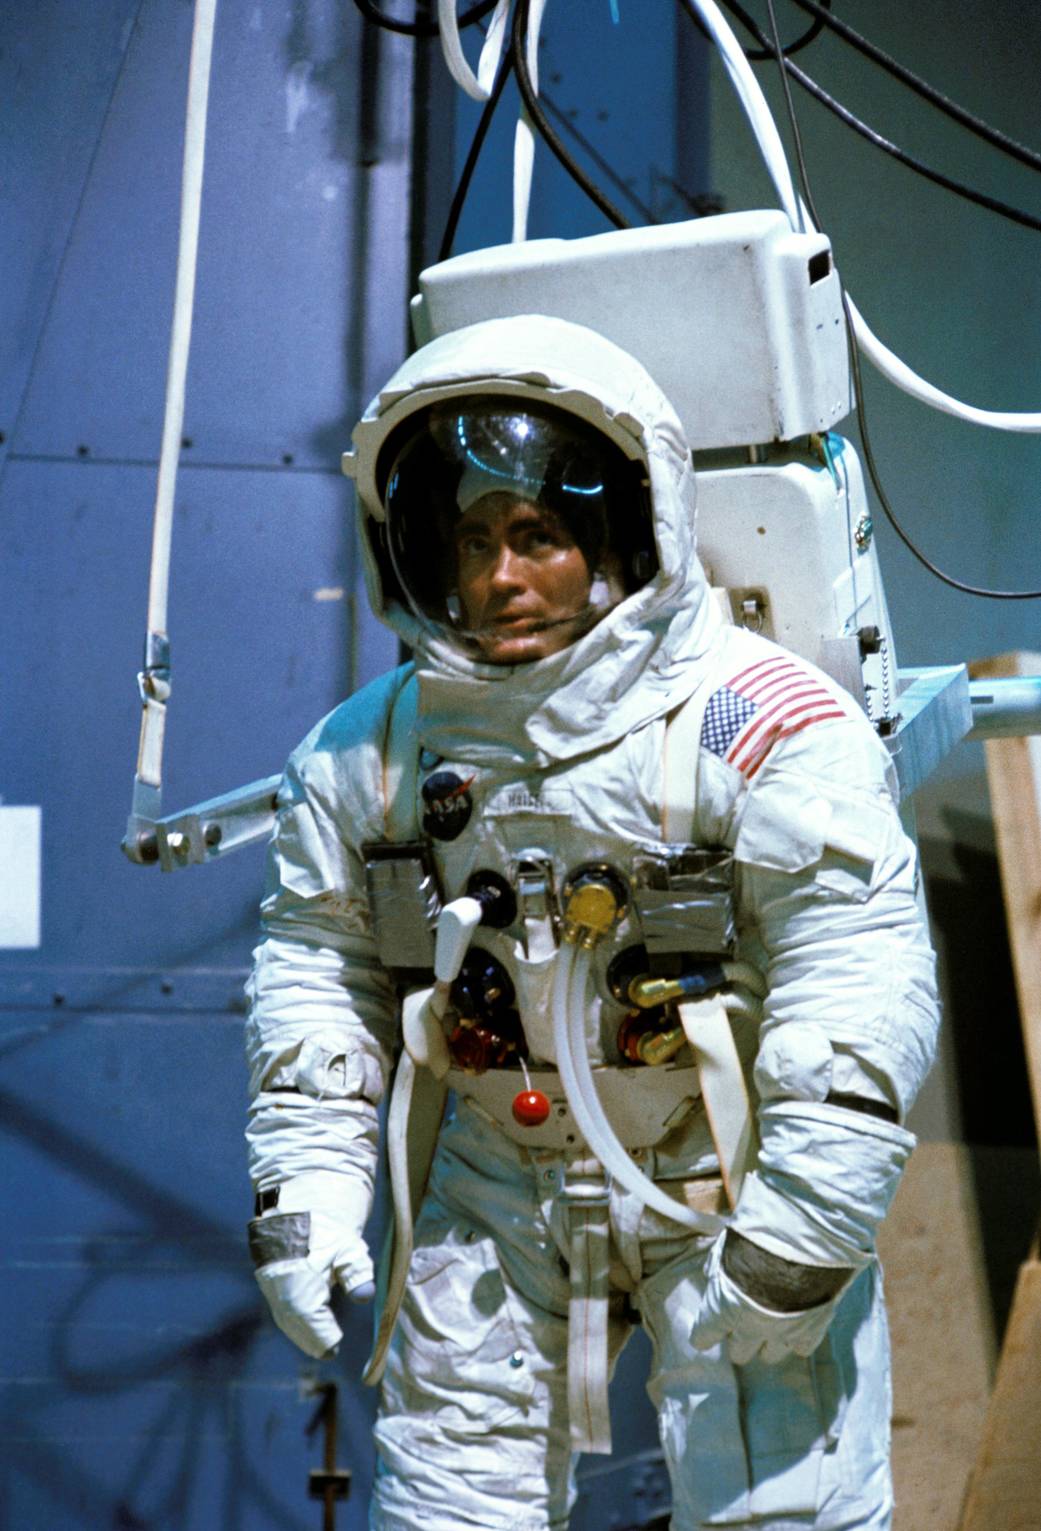 Astronaut in spacesuit with visor open during training activities